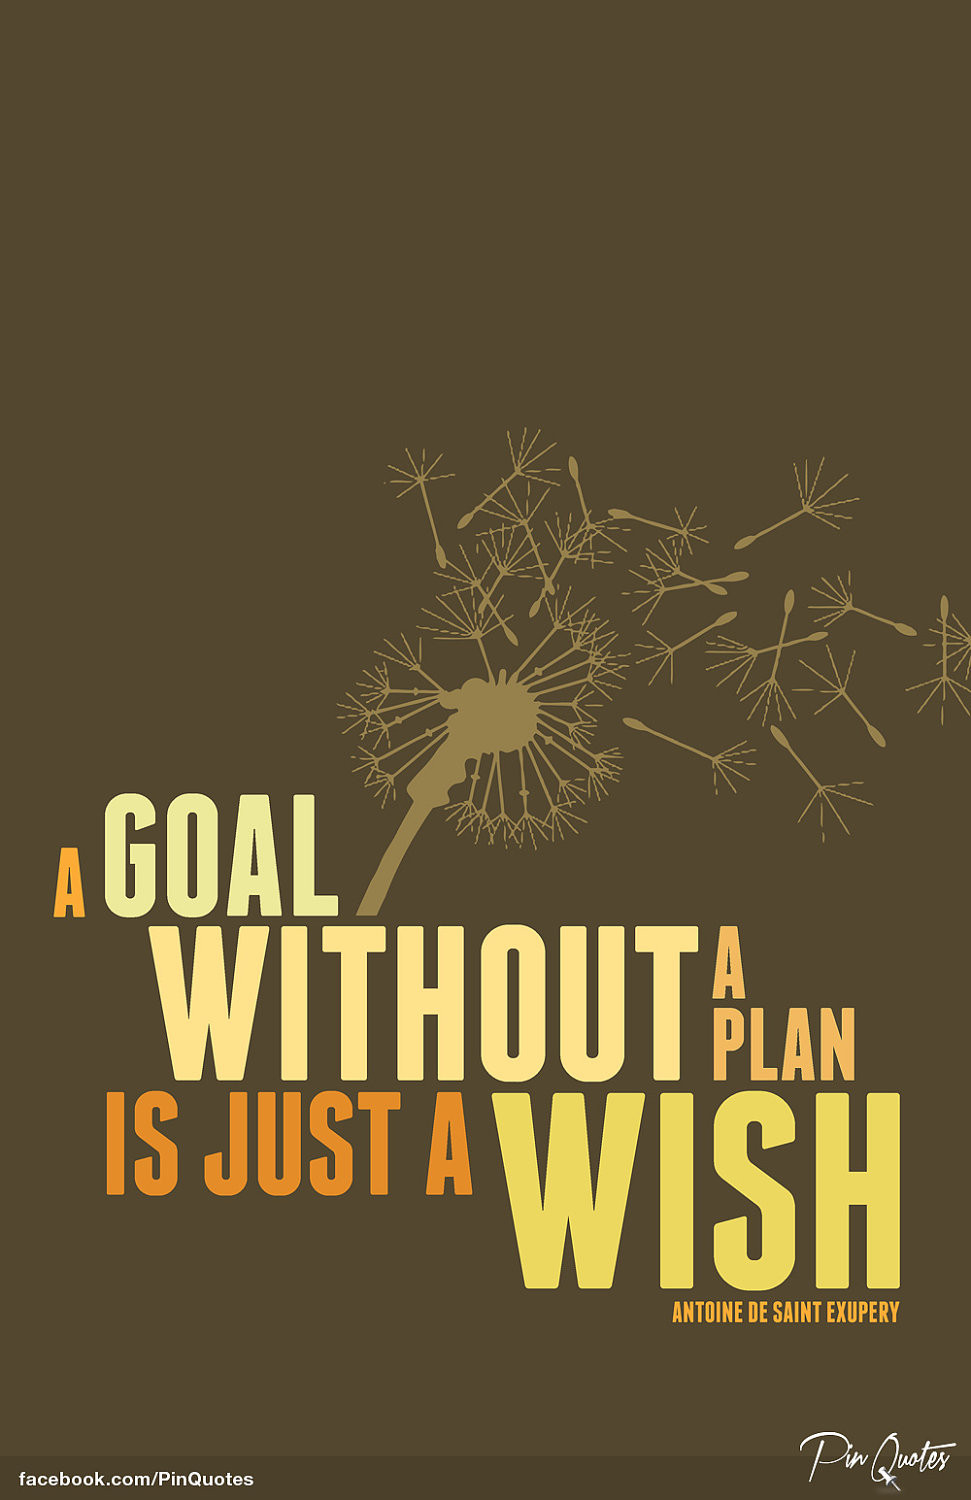 Quotes About Goal In Life
 Inspirational Quotes About Goals QuotesGram